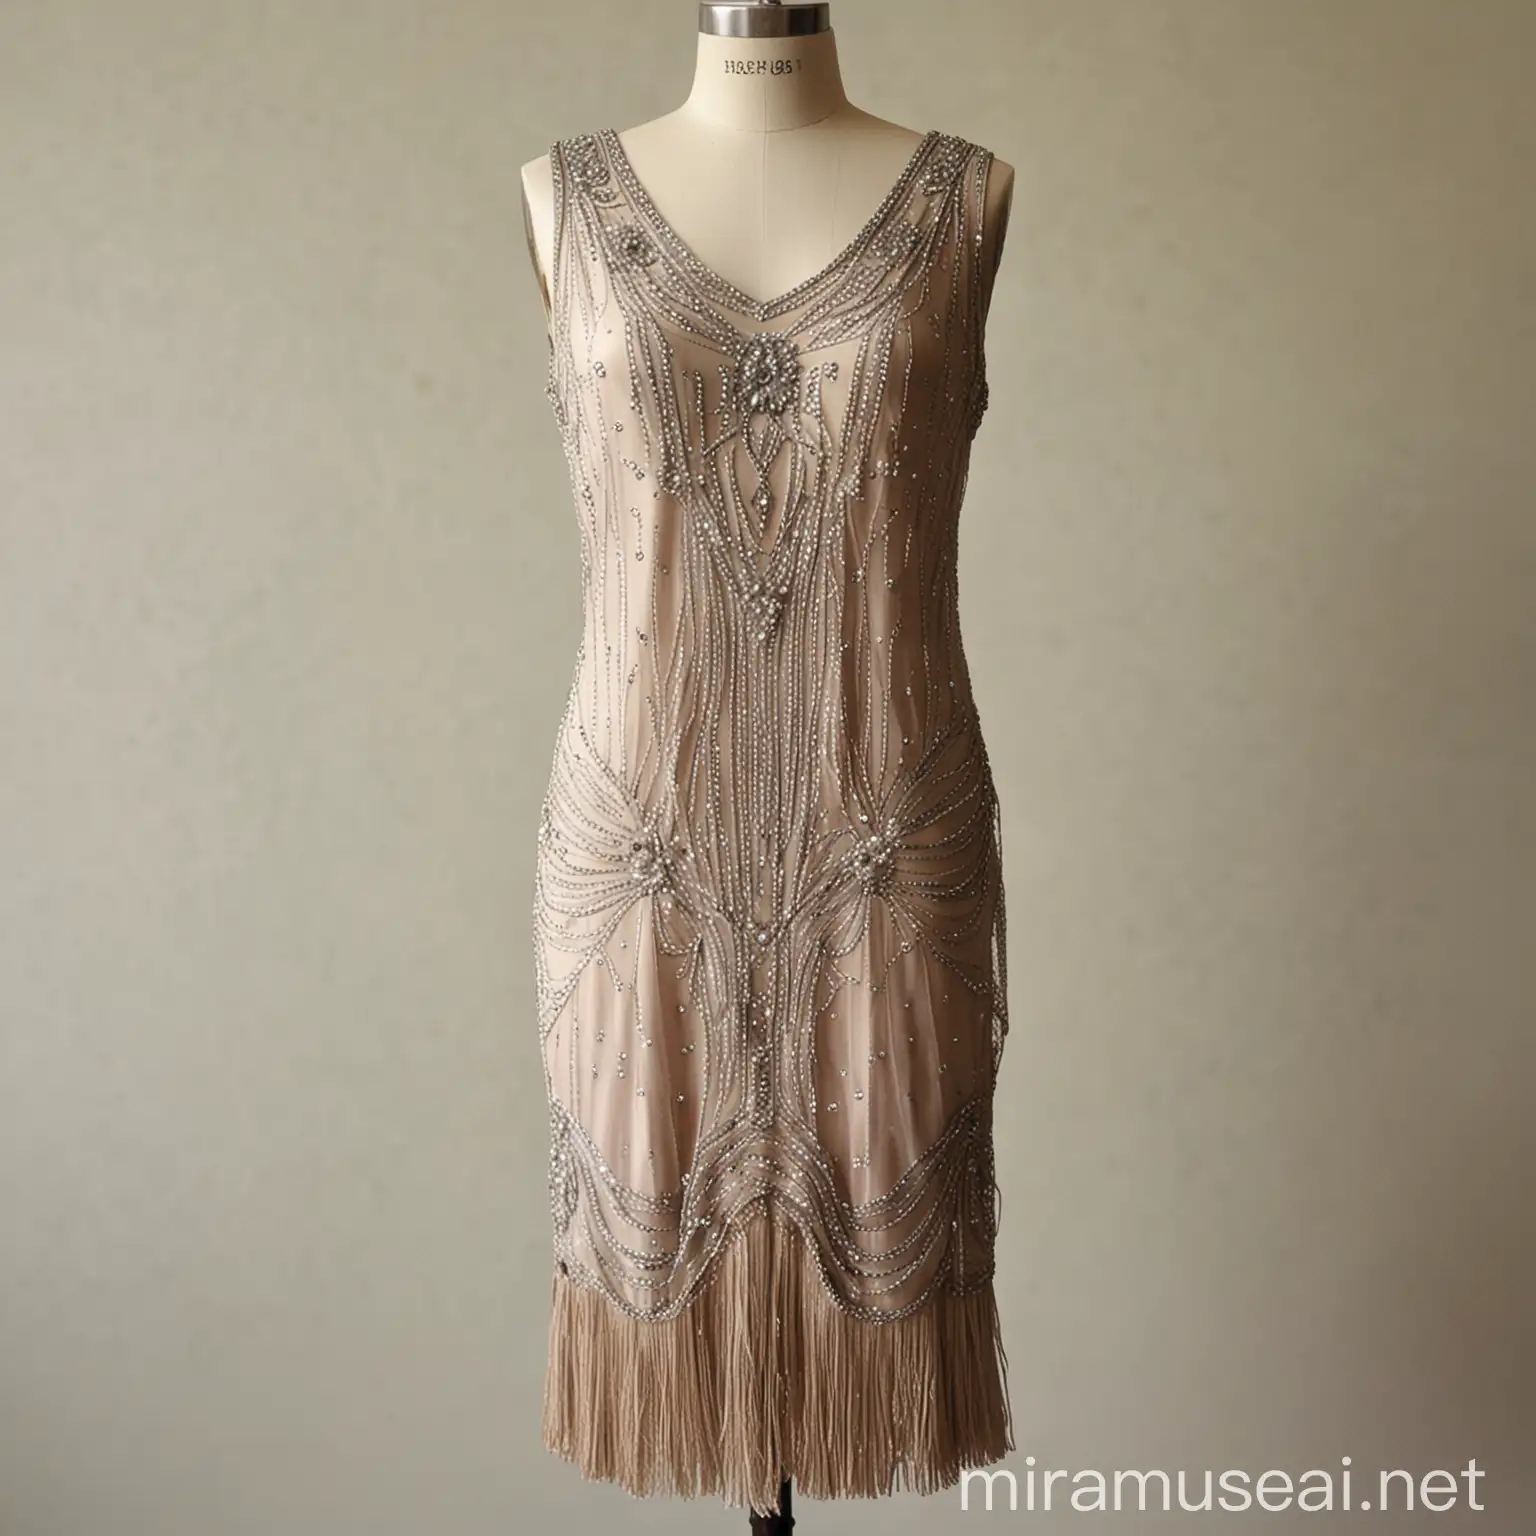 Vintage Flapper Dress from the 1920s with Intricate Embroidery